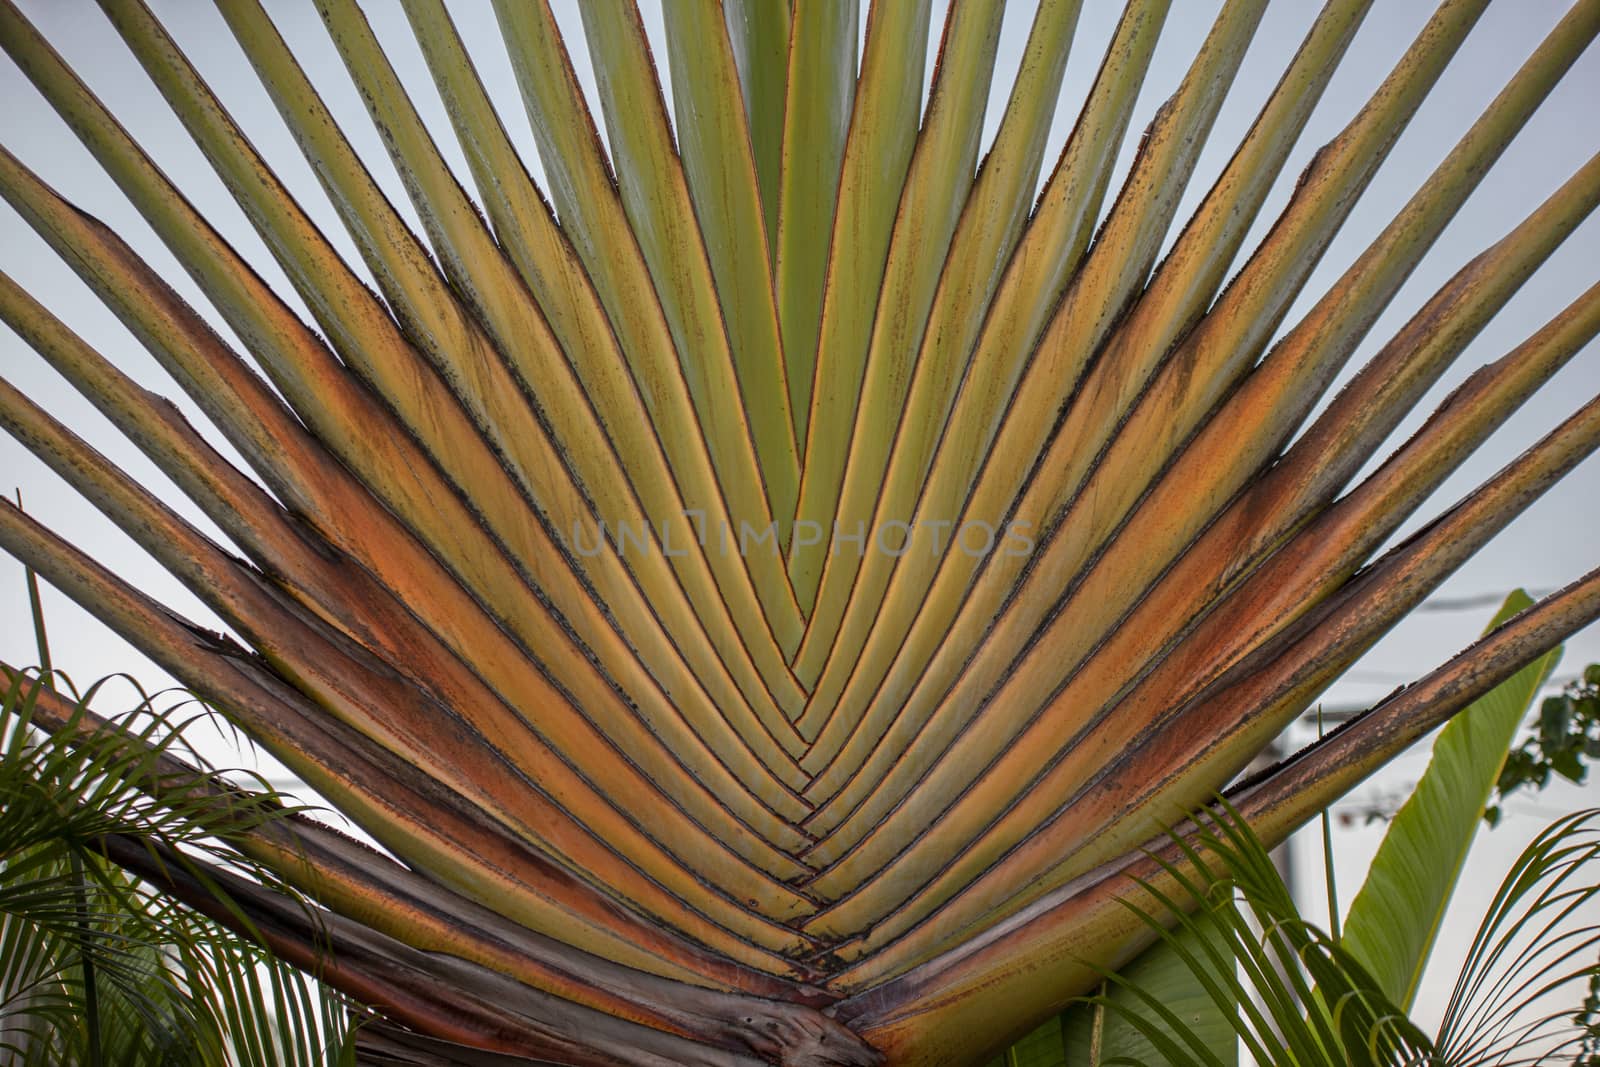 Particular palm detail by pippocarlot